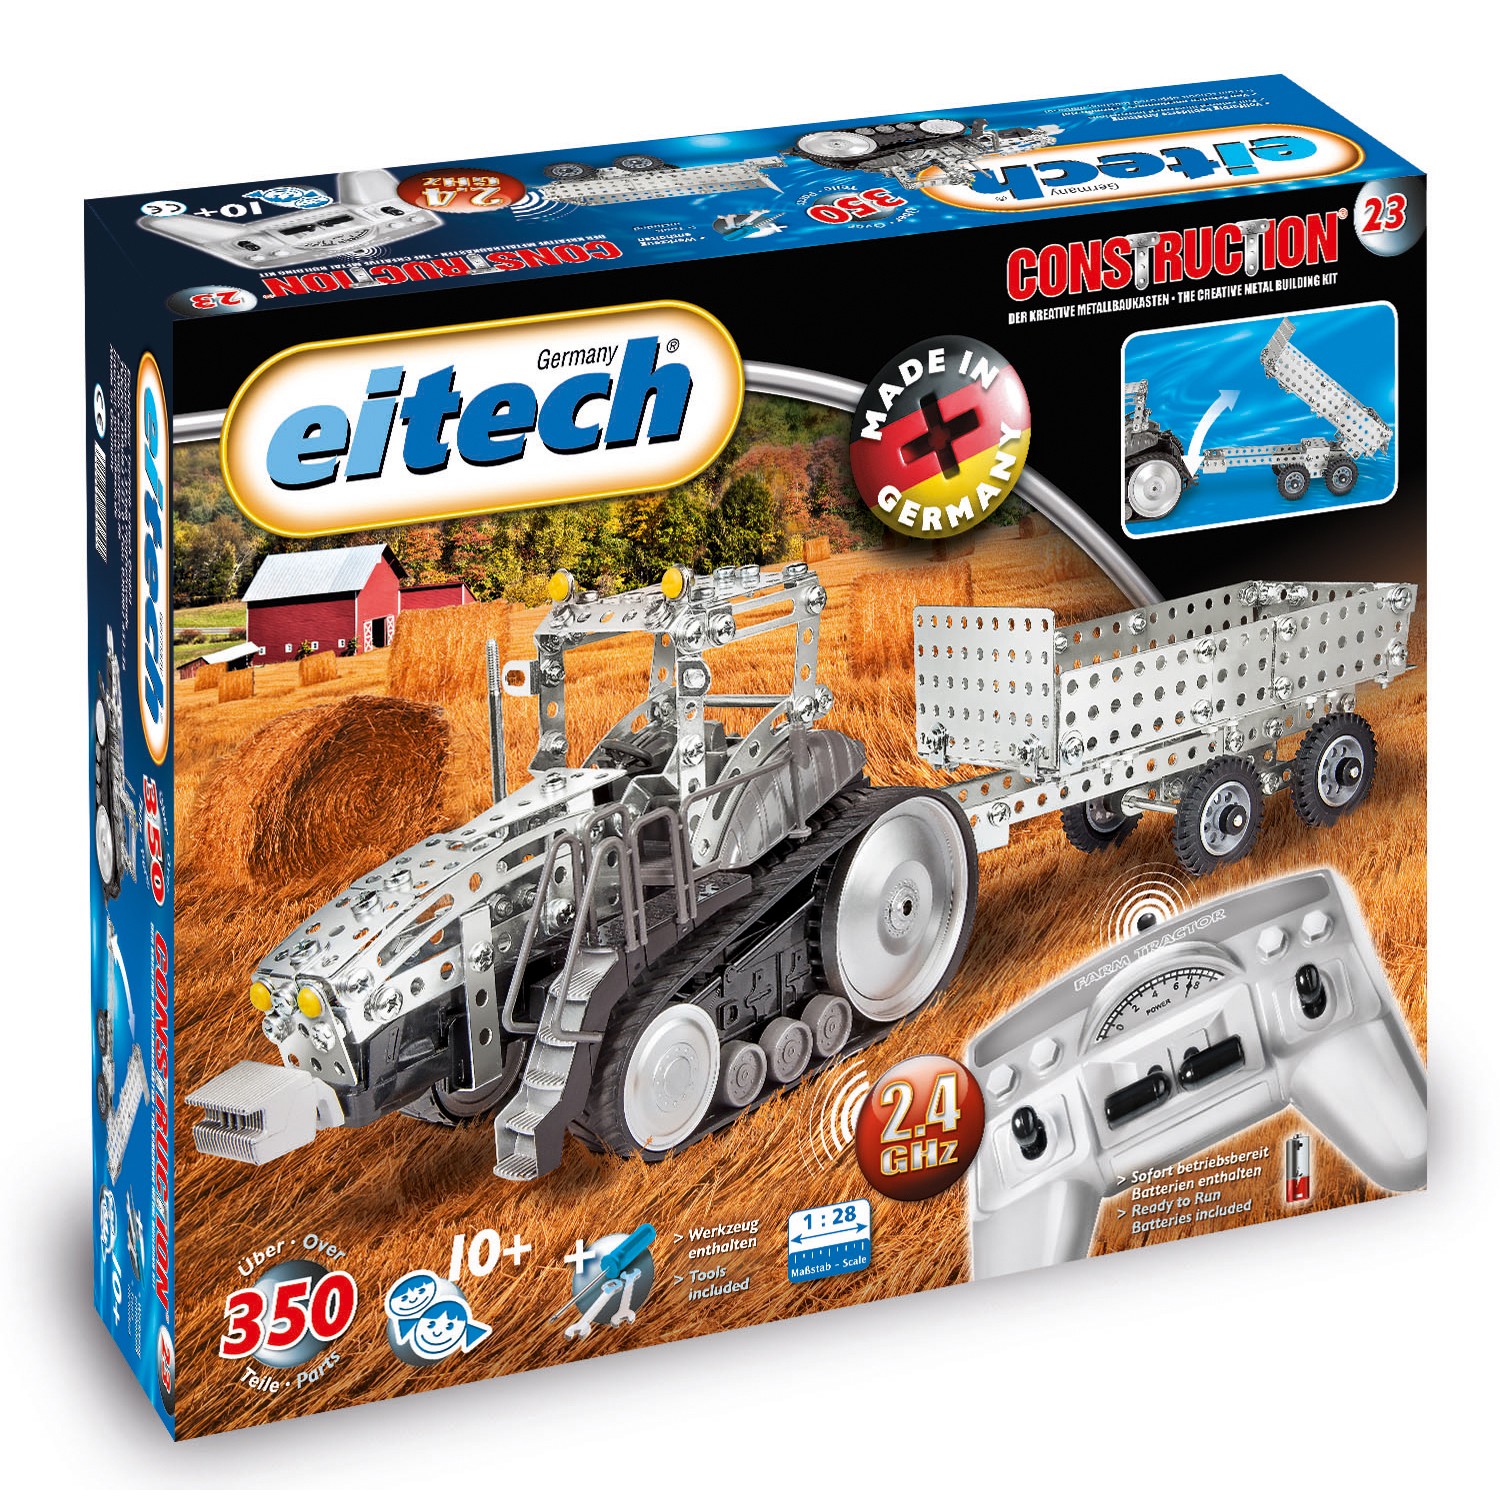 Tractor With Trailer Eitech C81 Metal Building Construction Toy Steel Model Kit